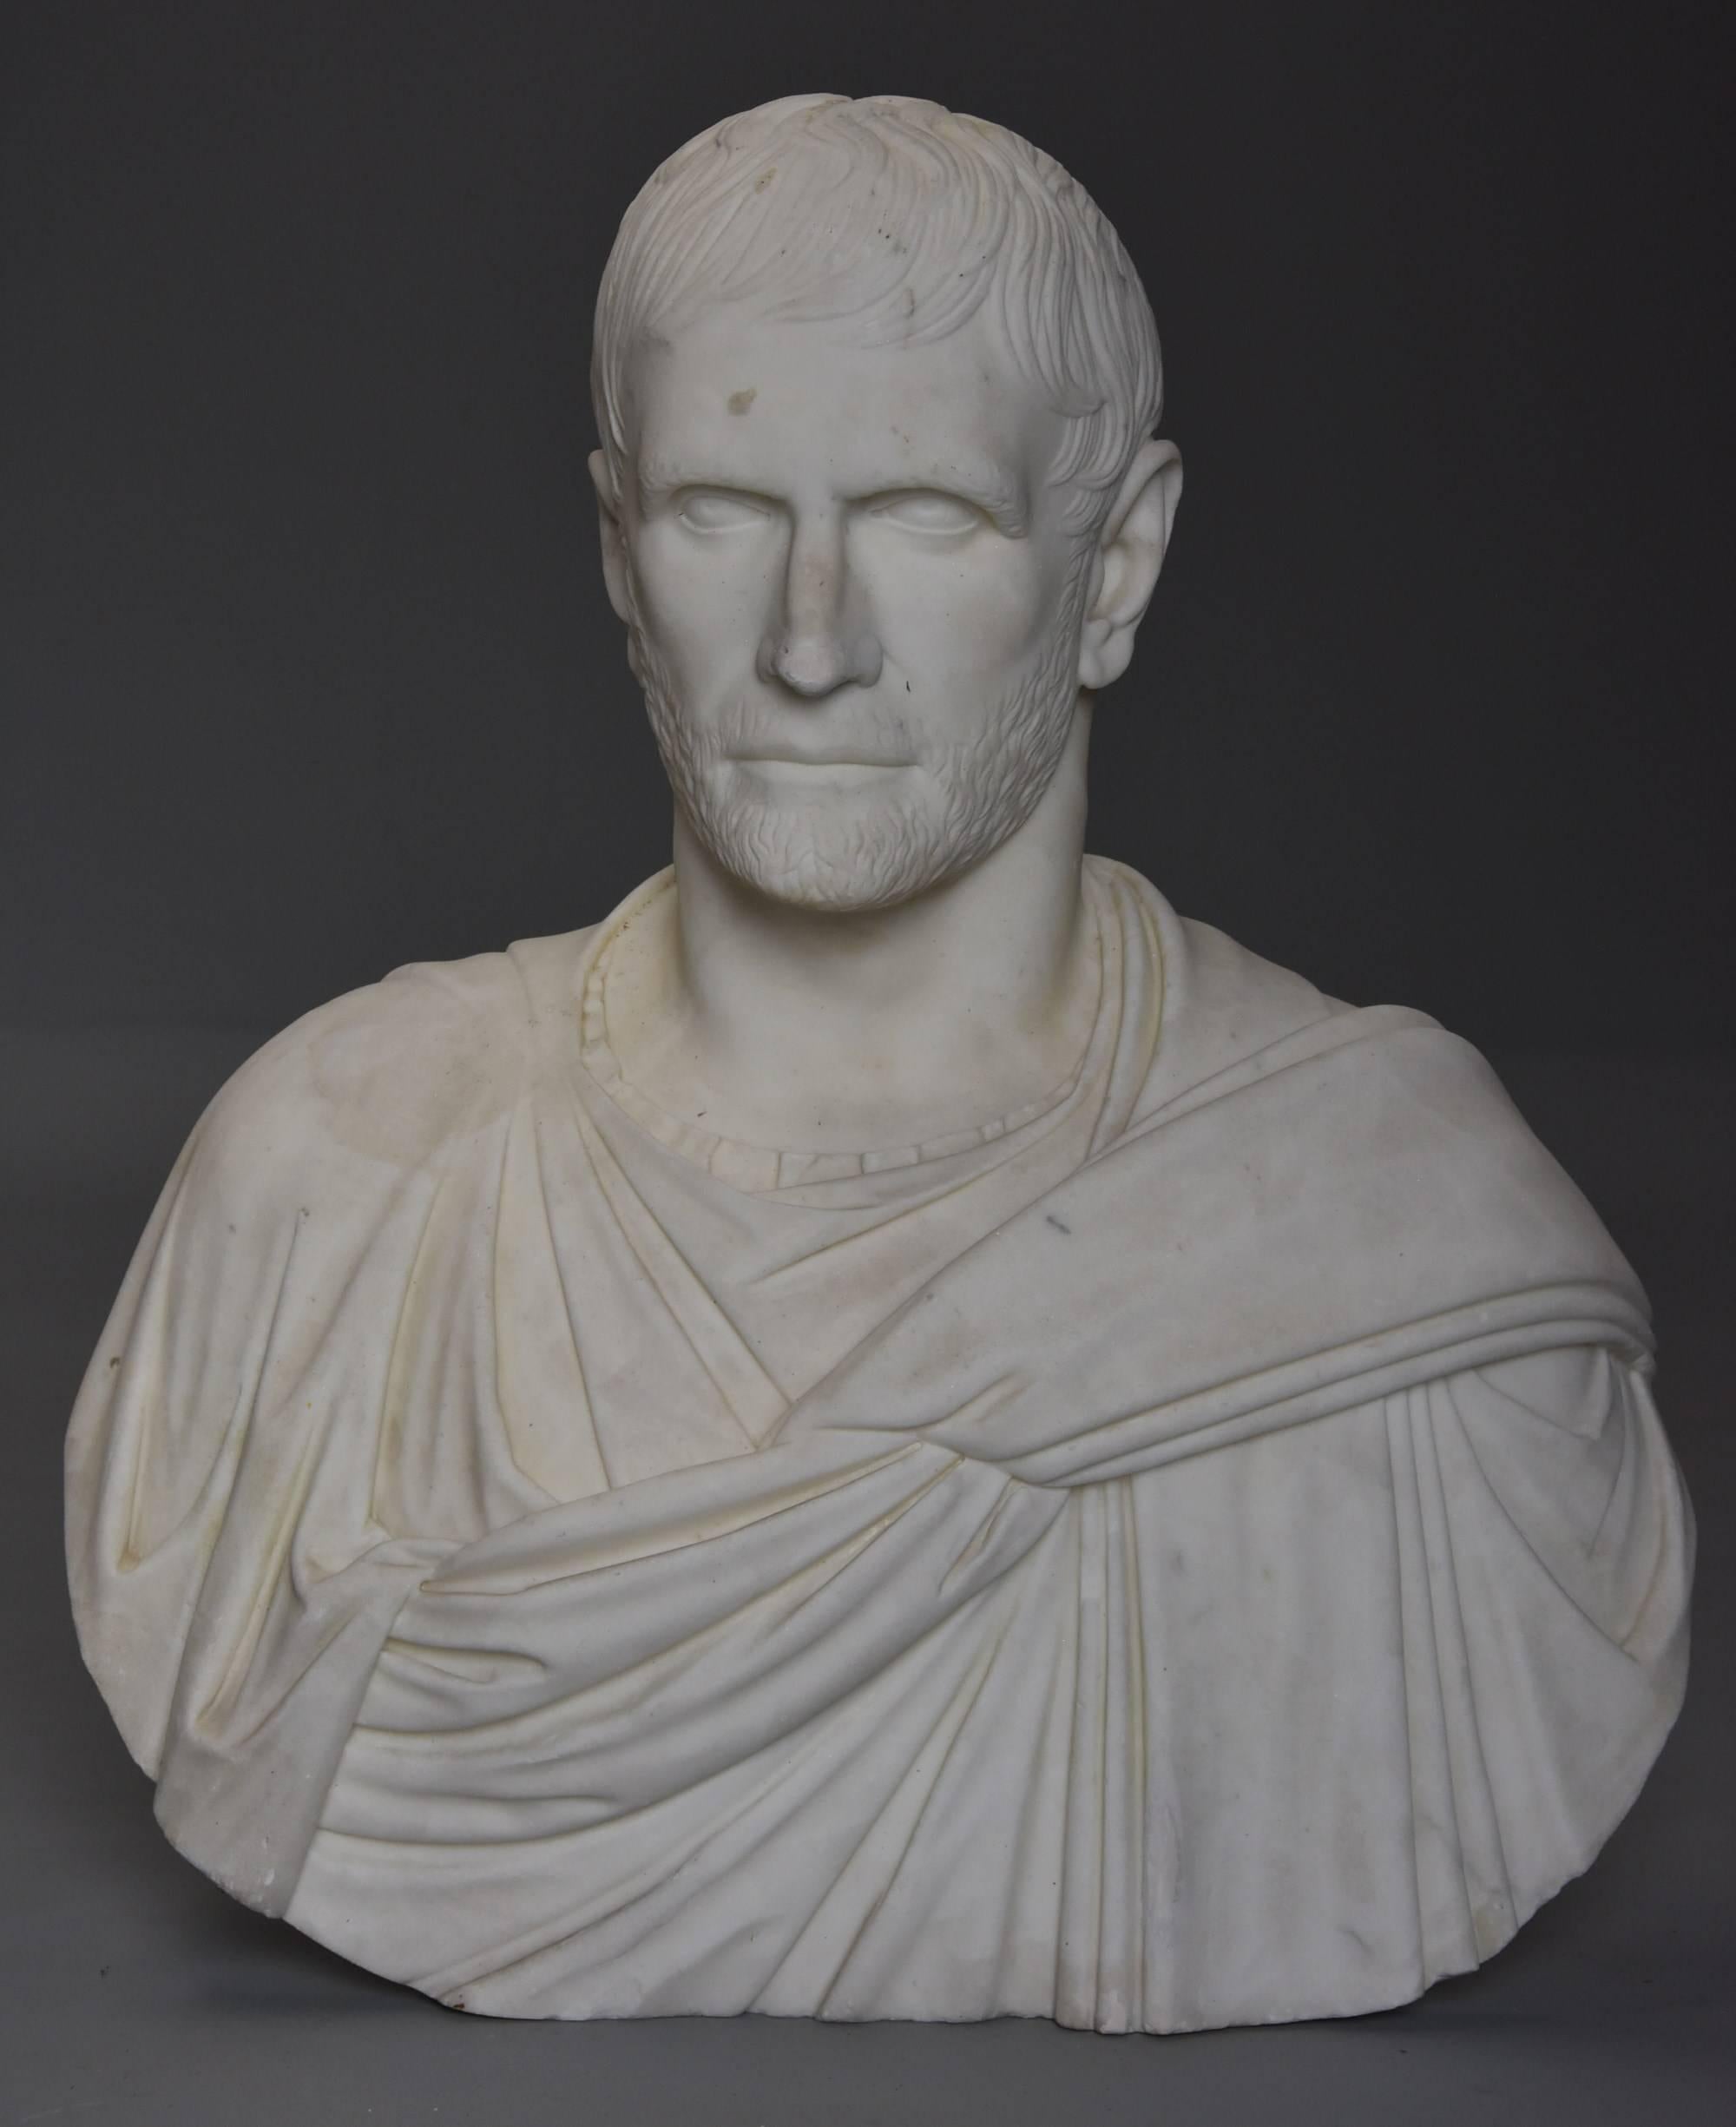 A superb and rare early 19th century larger than life Carrara marble carved bust of a Roman Nobleman, ‘The Capitoline Brutus’, after the antique.

This marble sculpture of ‘The Capitoline Brutus’ is taken from the original ancient Roman bronze